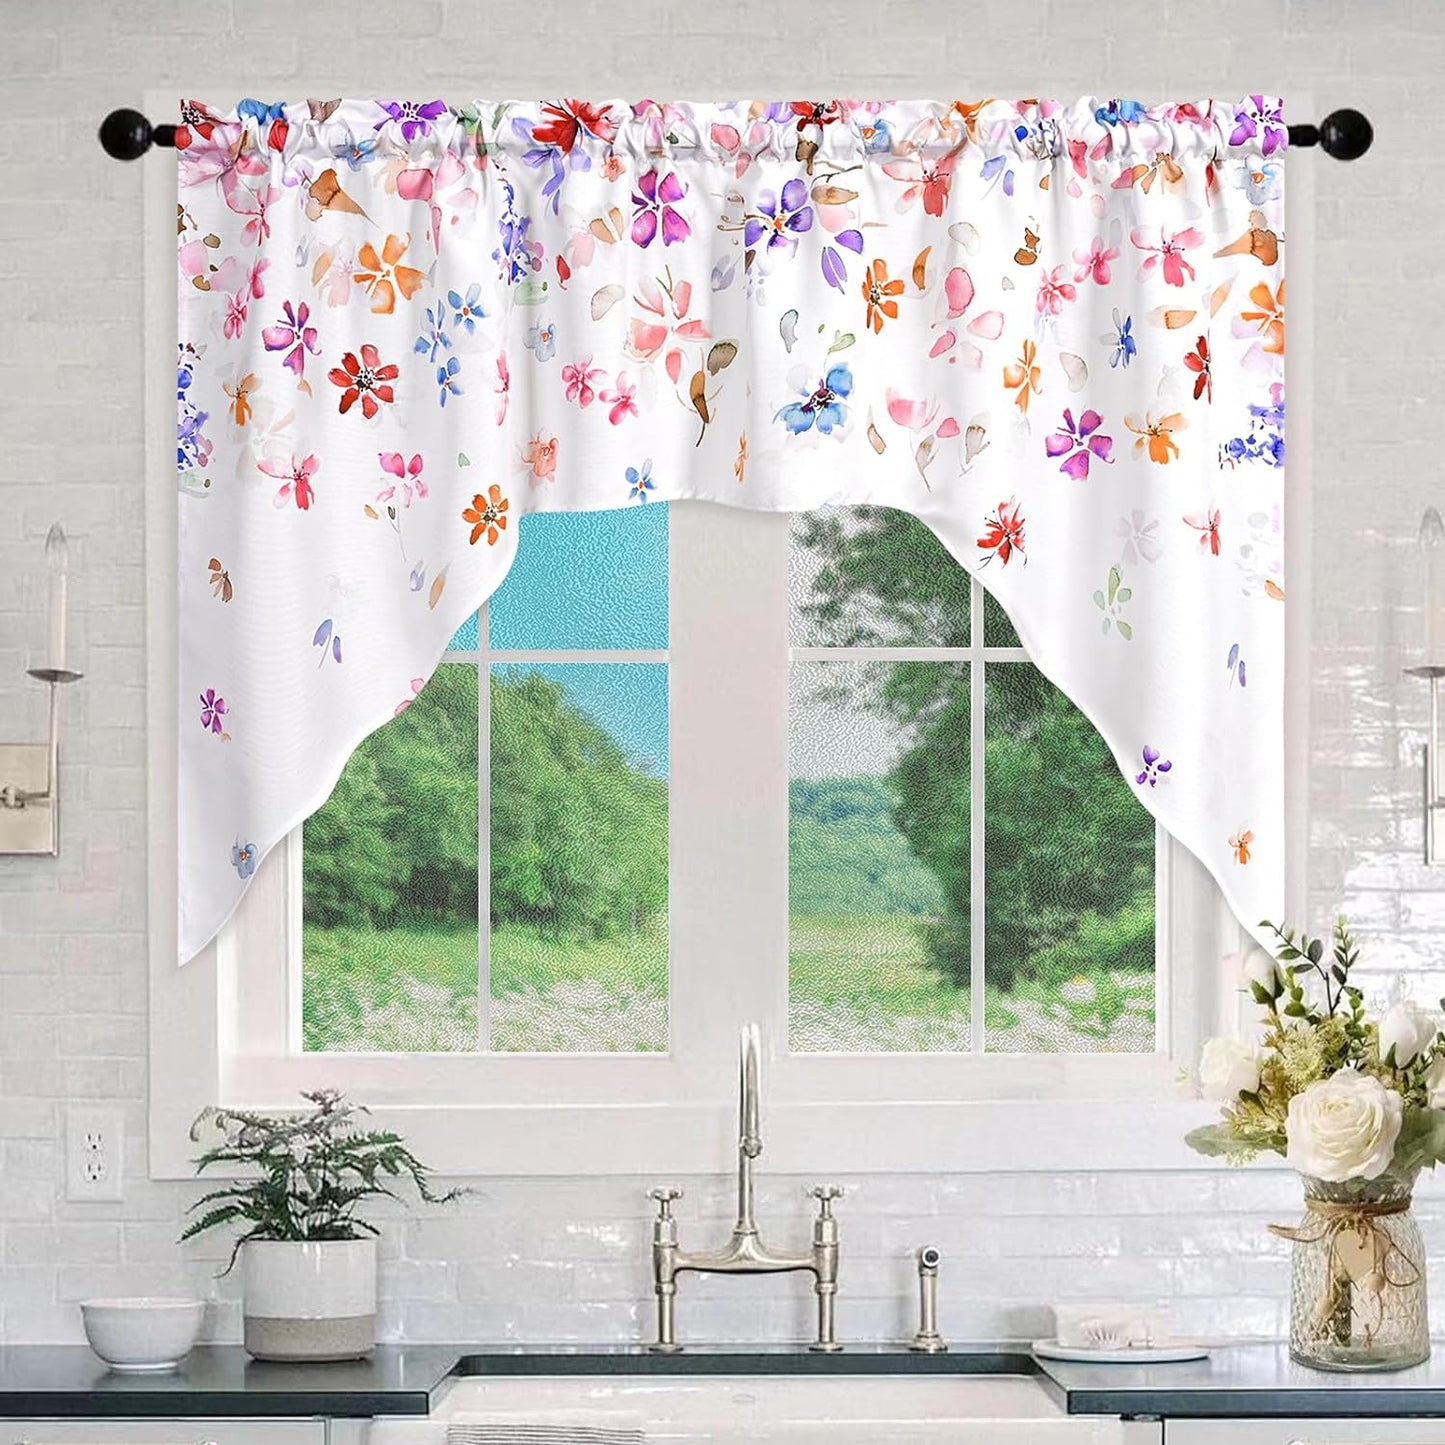 FRAMICS Floral Window Curtains for Living Room Floral Curtains 63 Inch Length 2 Panels Colorful Flowers Curtains for Bedroom Light Filtering Rod Pocket Curtains, 52" W X 63" L  FRAMICS White 60"W X 36"L 